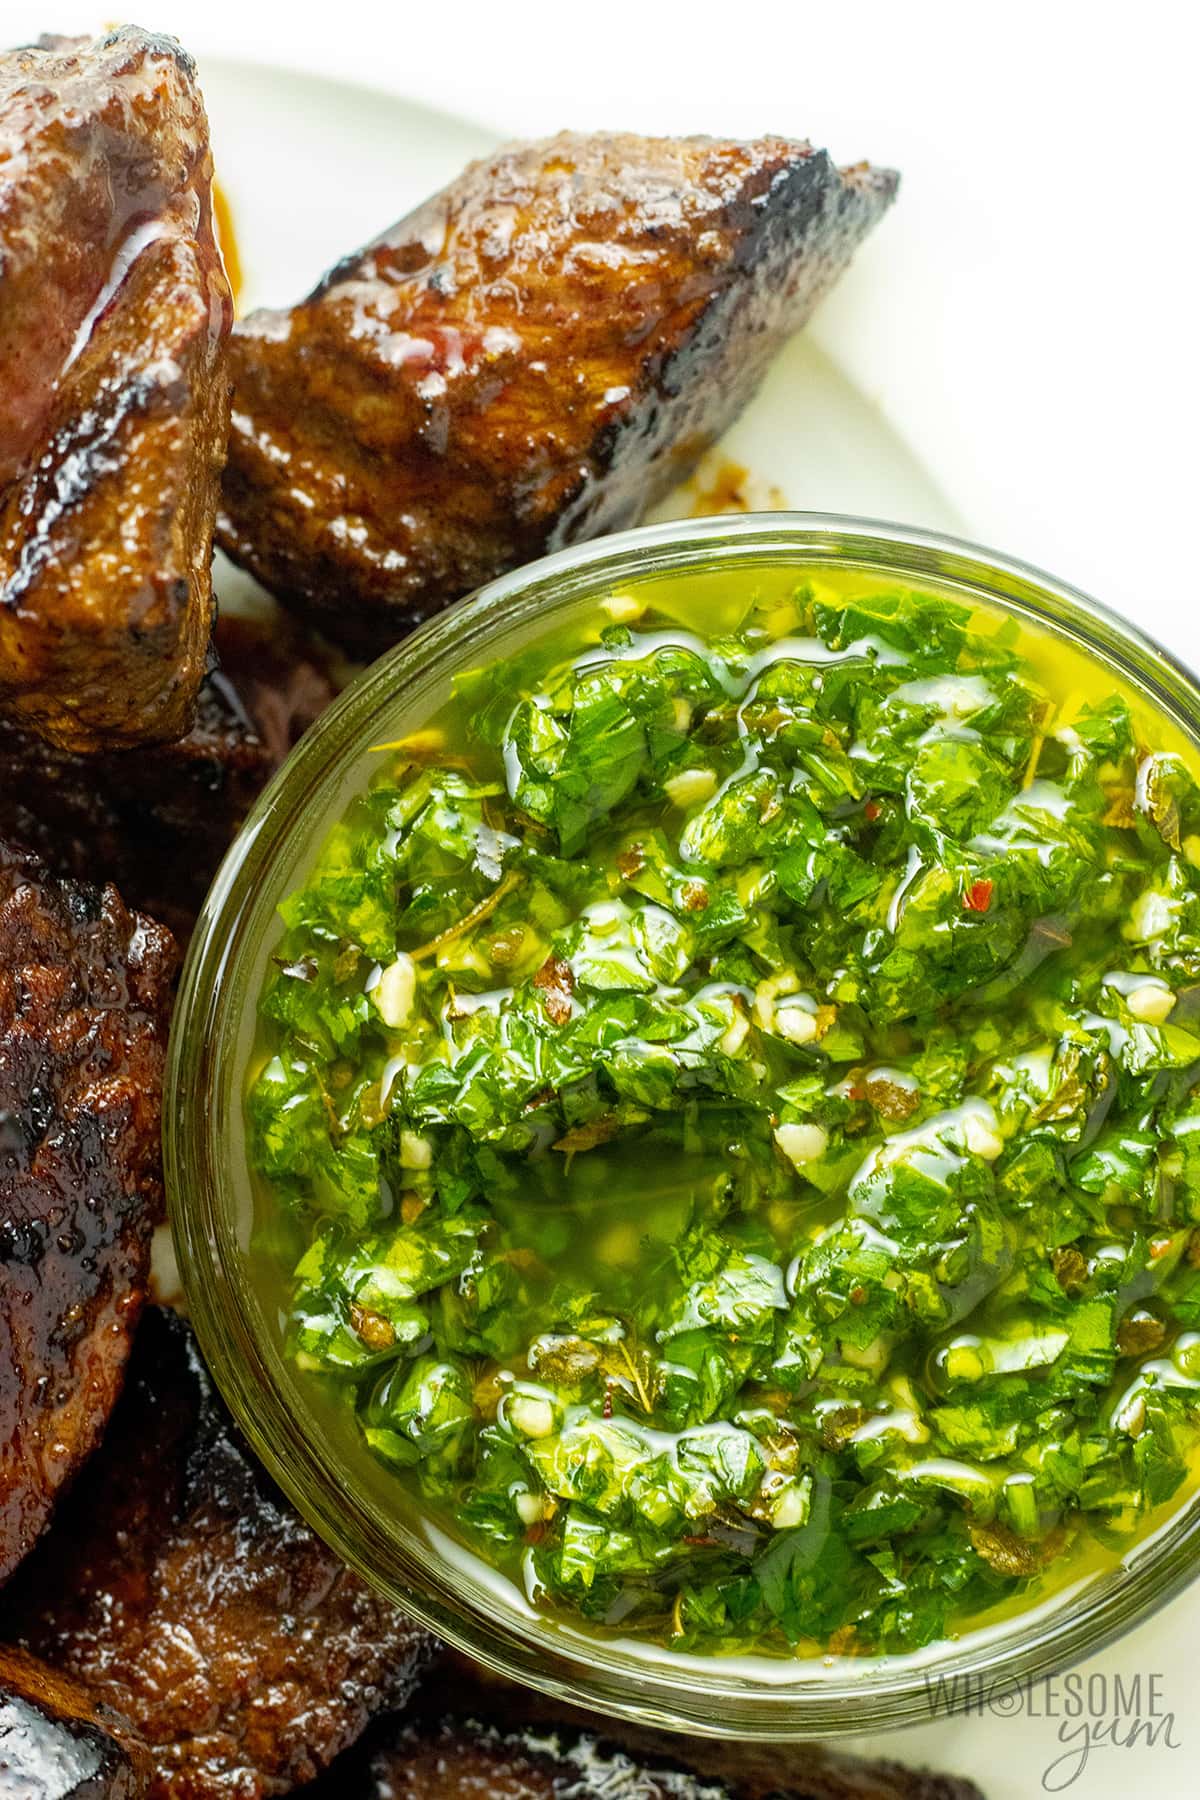 Steak next to chimichurri sauce on a plate.